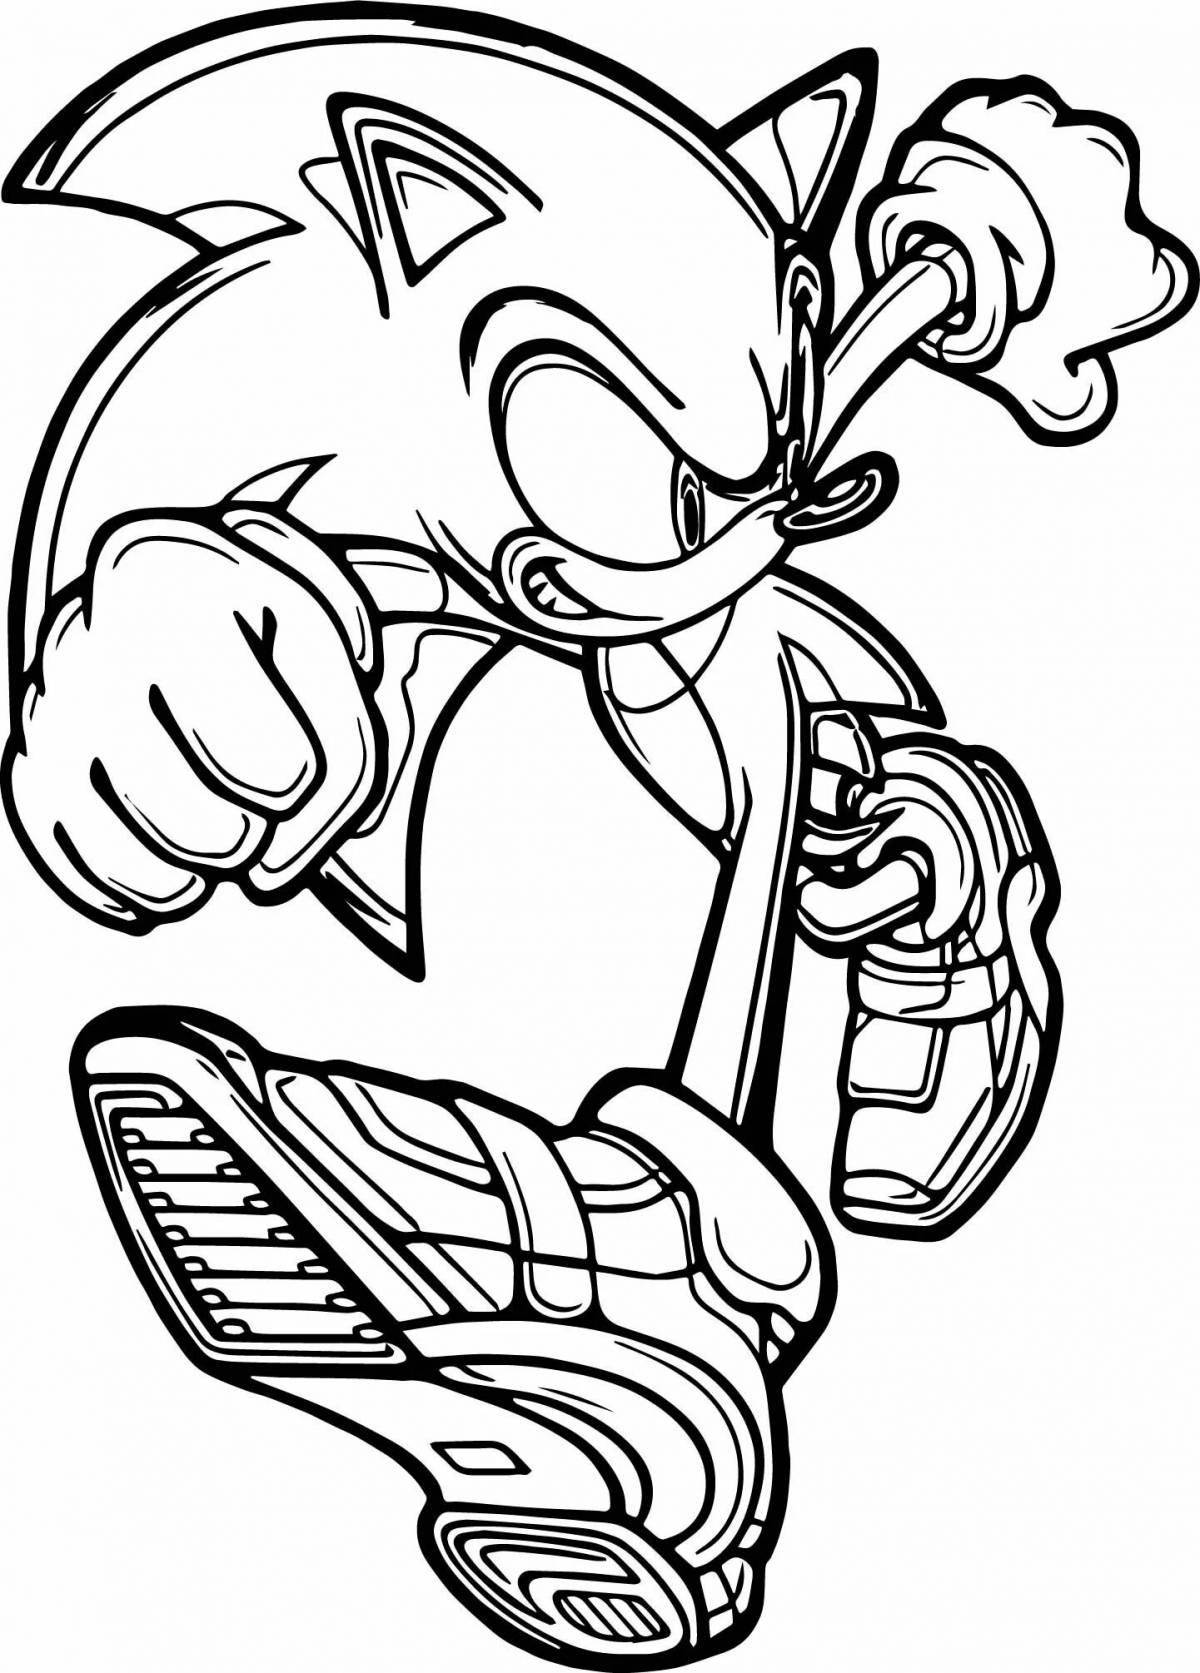 Excalibur sonic coloring page